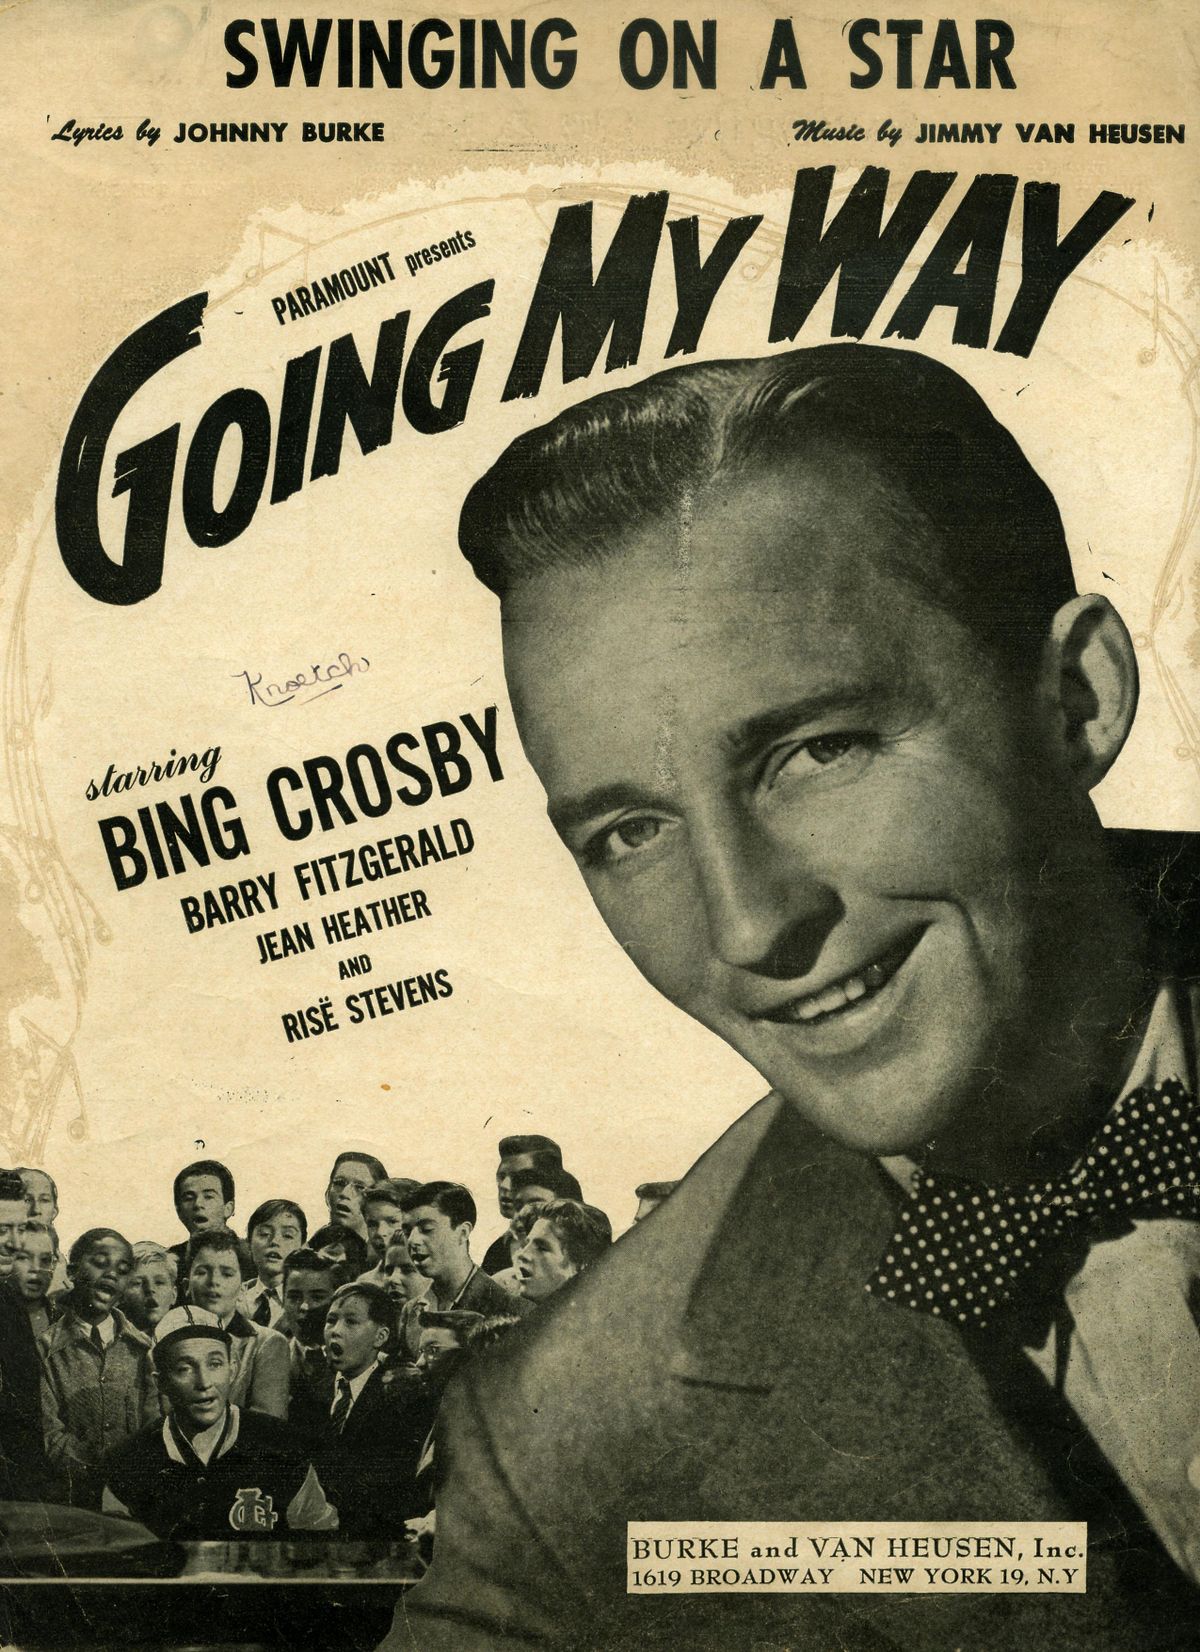 Sheet music cover of “Going My Way” from the musical "Going My Way" starring Bing Crosby, which earned Crosby an Oscar. (PHOTO ARCHIVE / SR)